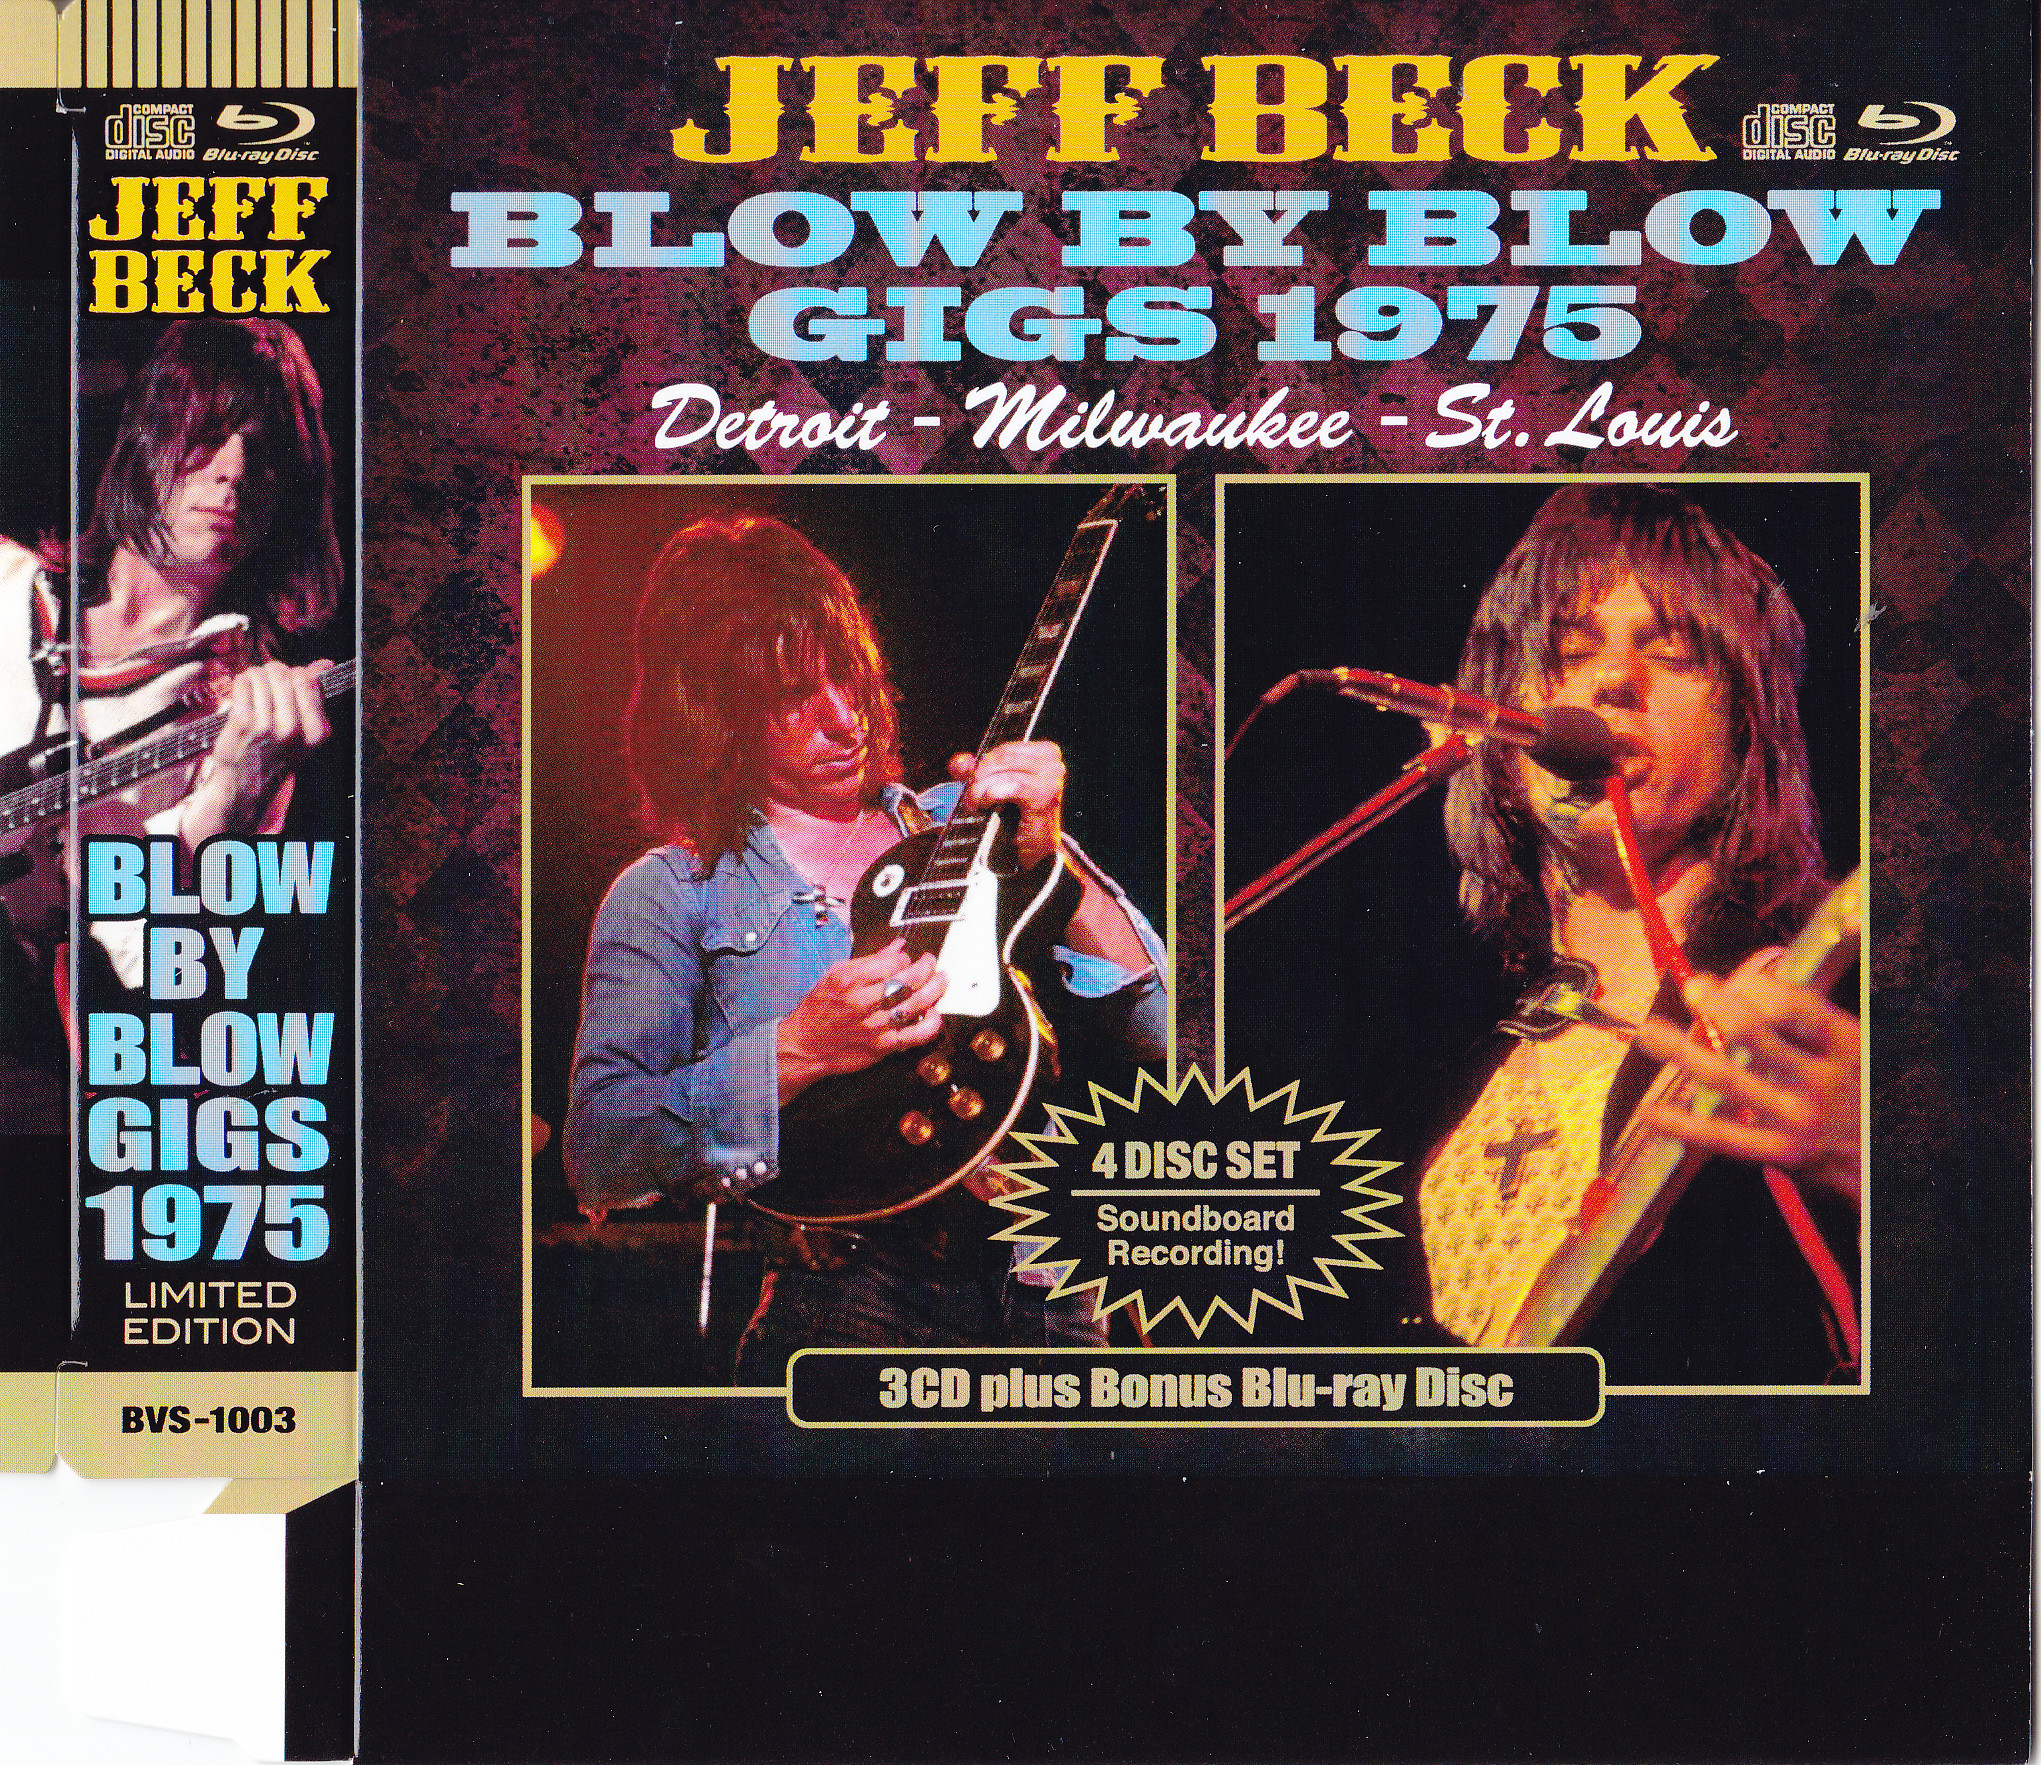 Jeff Beck / Blow By Blow Gigs 1975 Limited Edition / 3CD+1Bonus